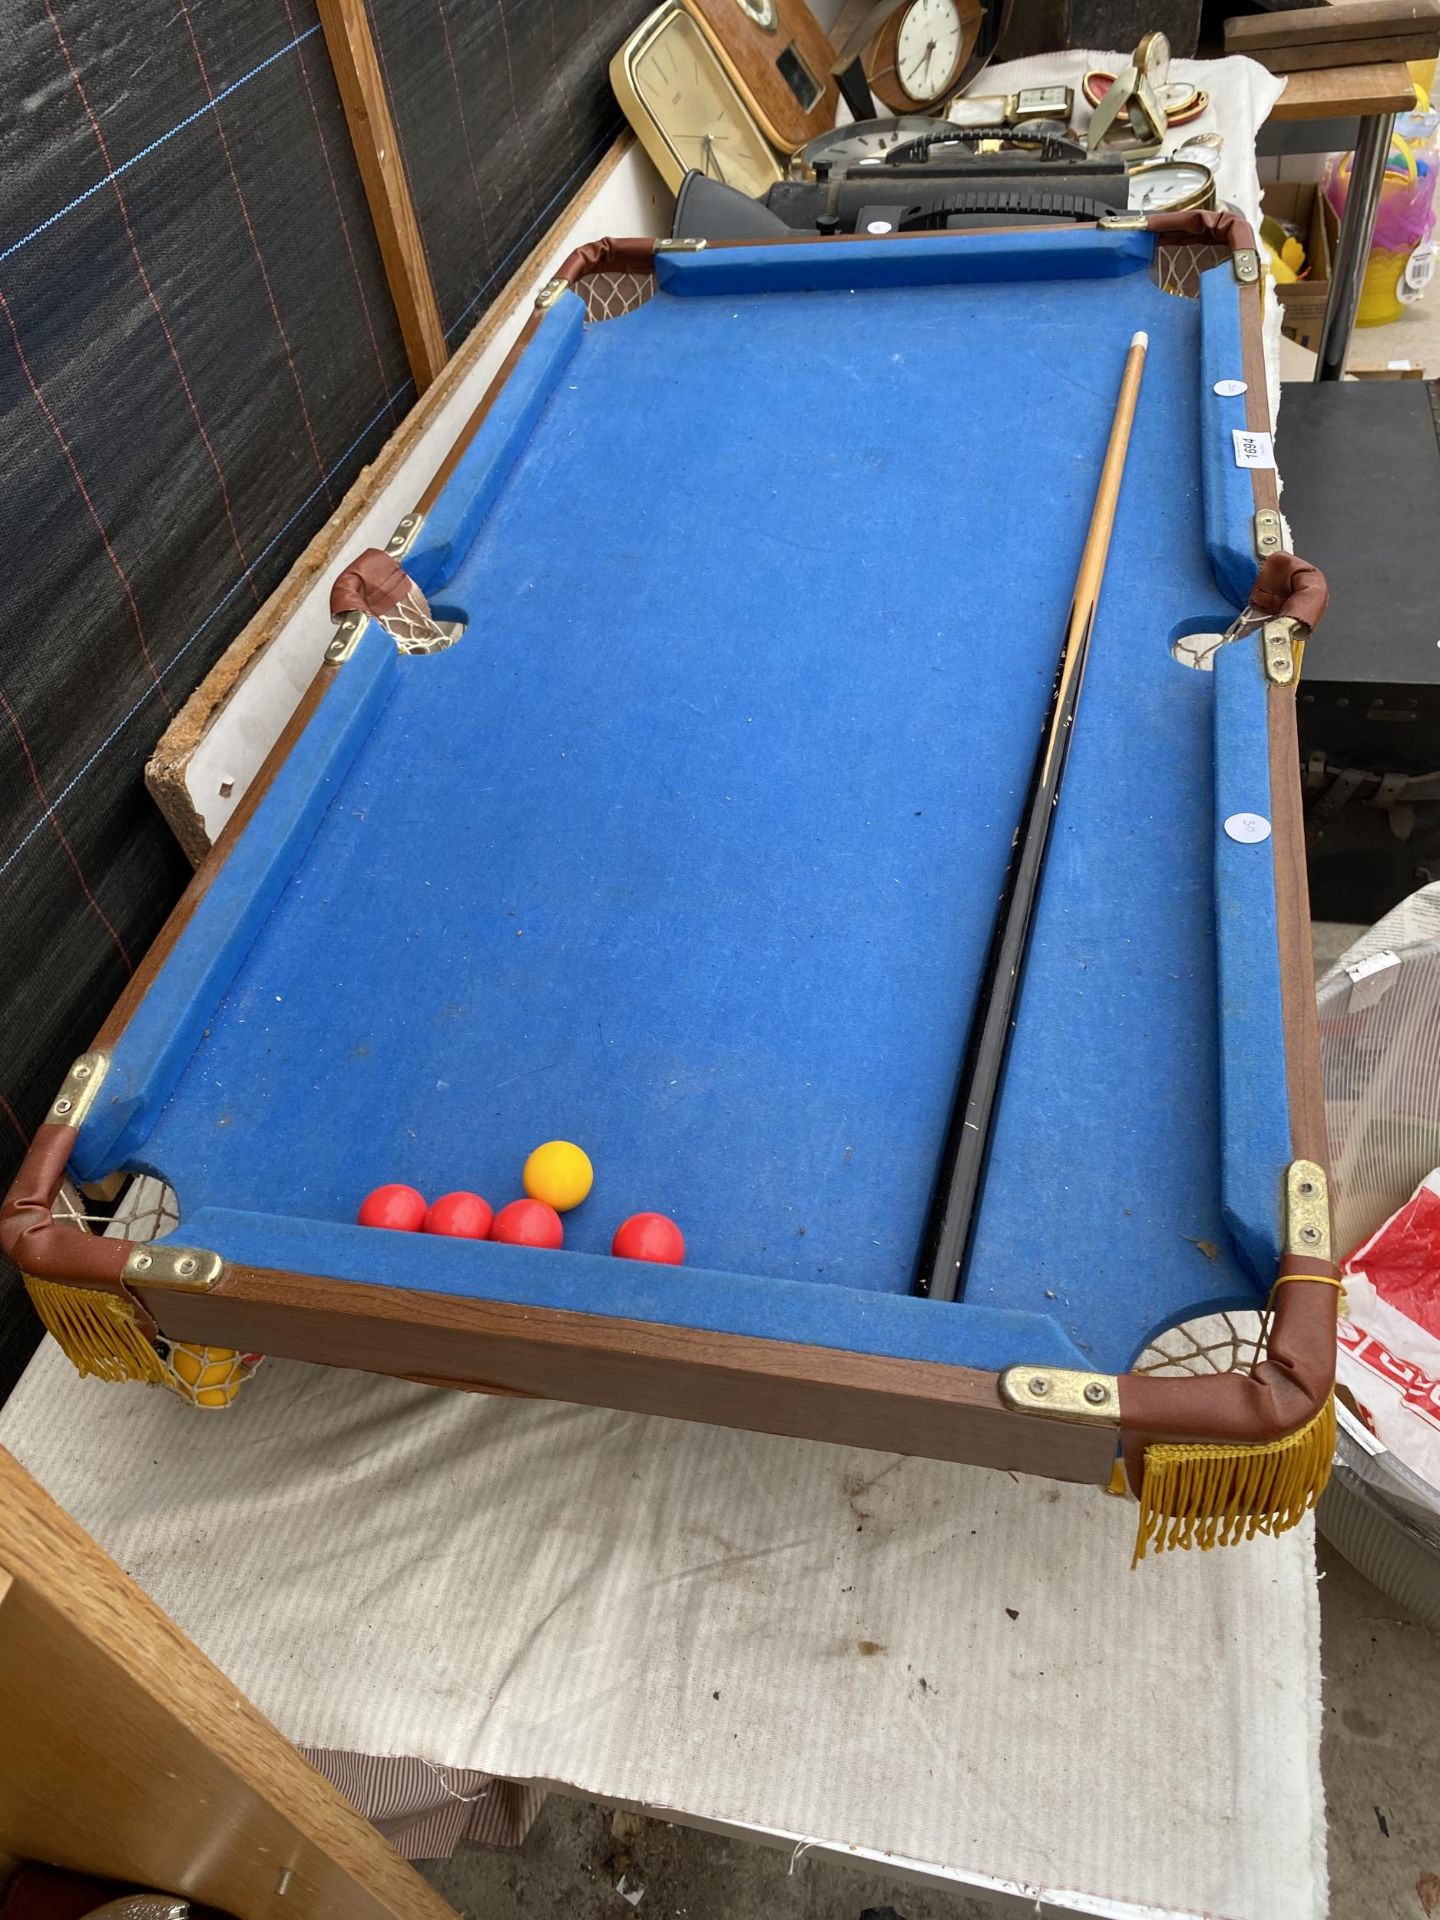 A TABLE TOP POOL TABLE WITH CUE AND BALLS - Image 2 of 4